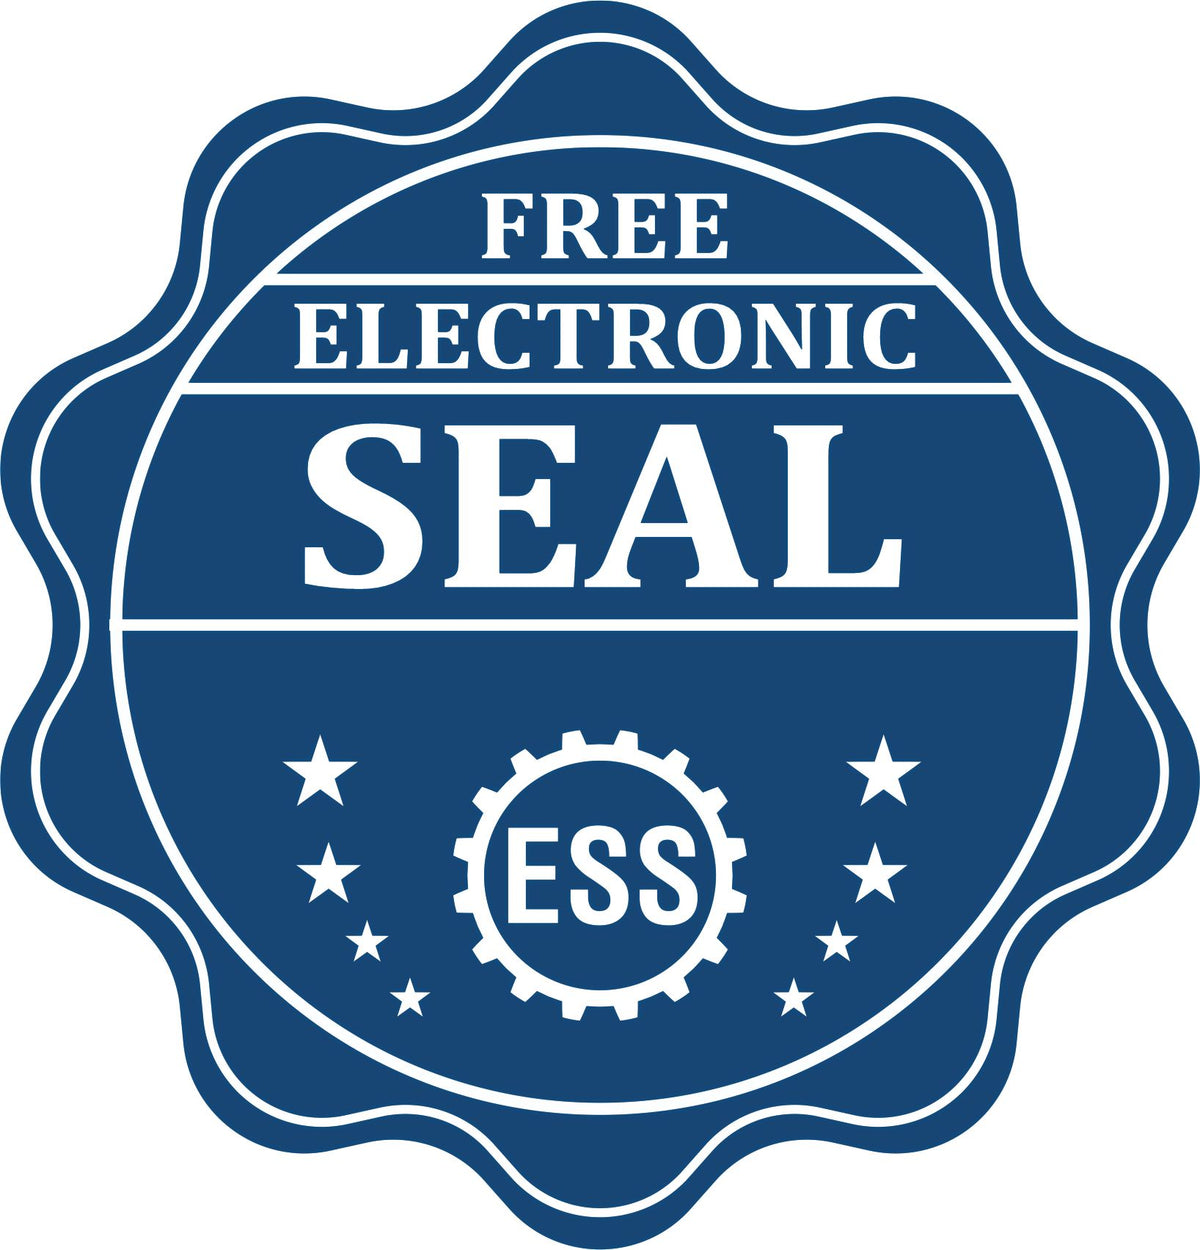 A badge showing a free electronic seal for the Self-Inking Hawaii Landscape Architect Stamp with stars and the ESS gear on the emblem.